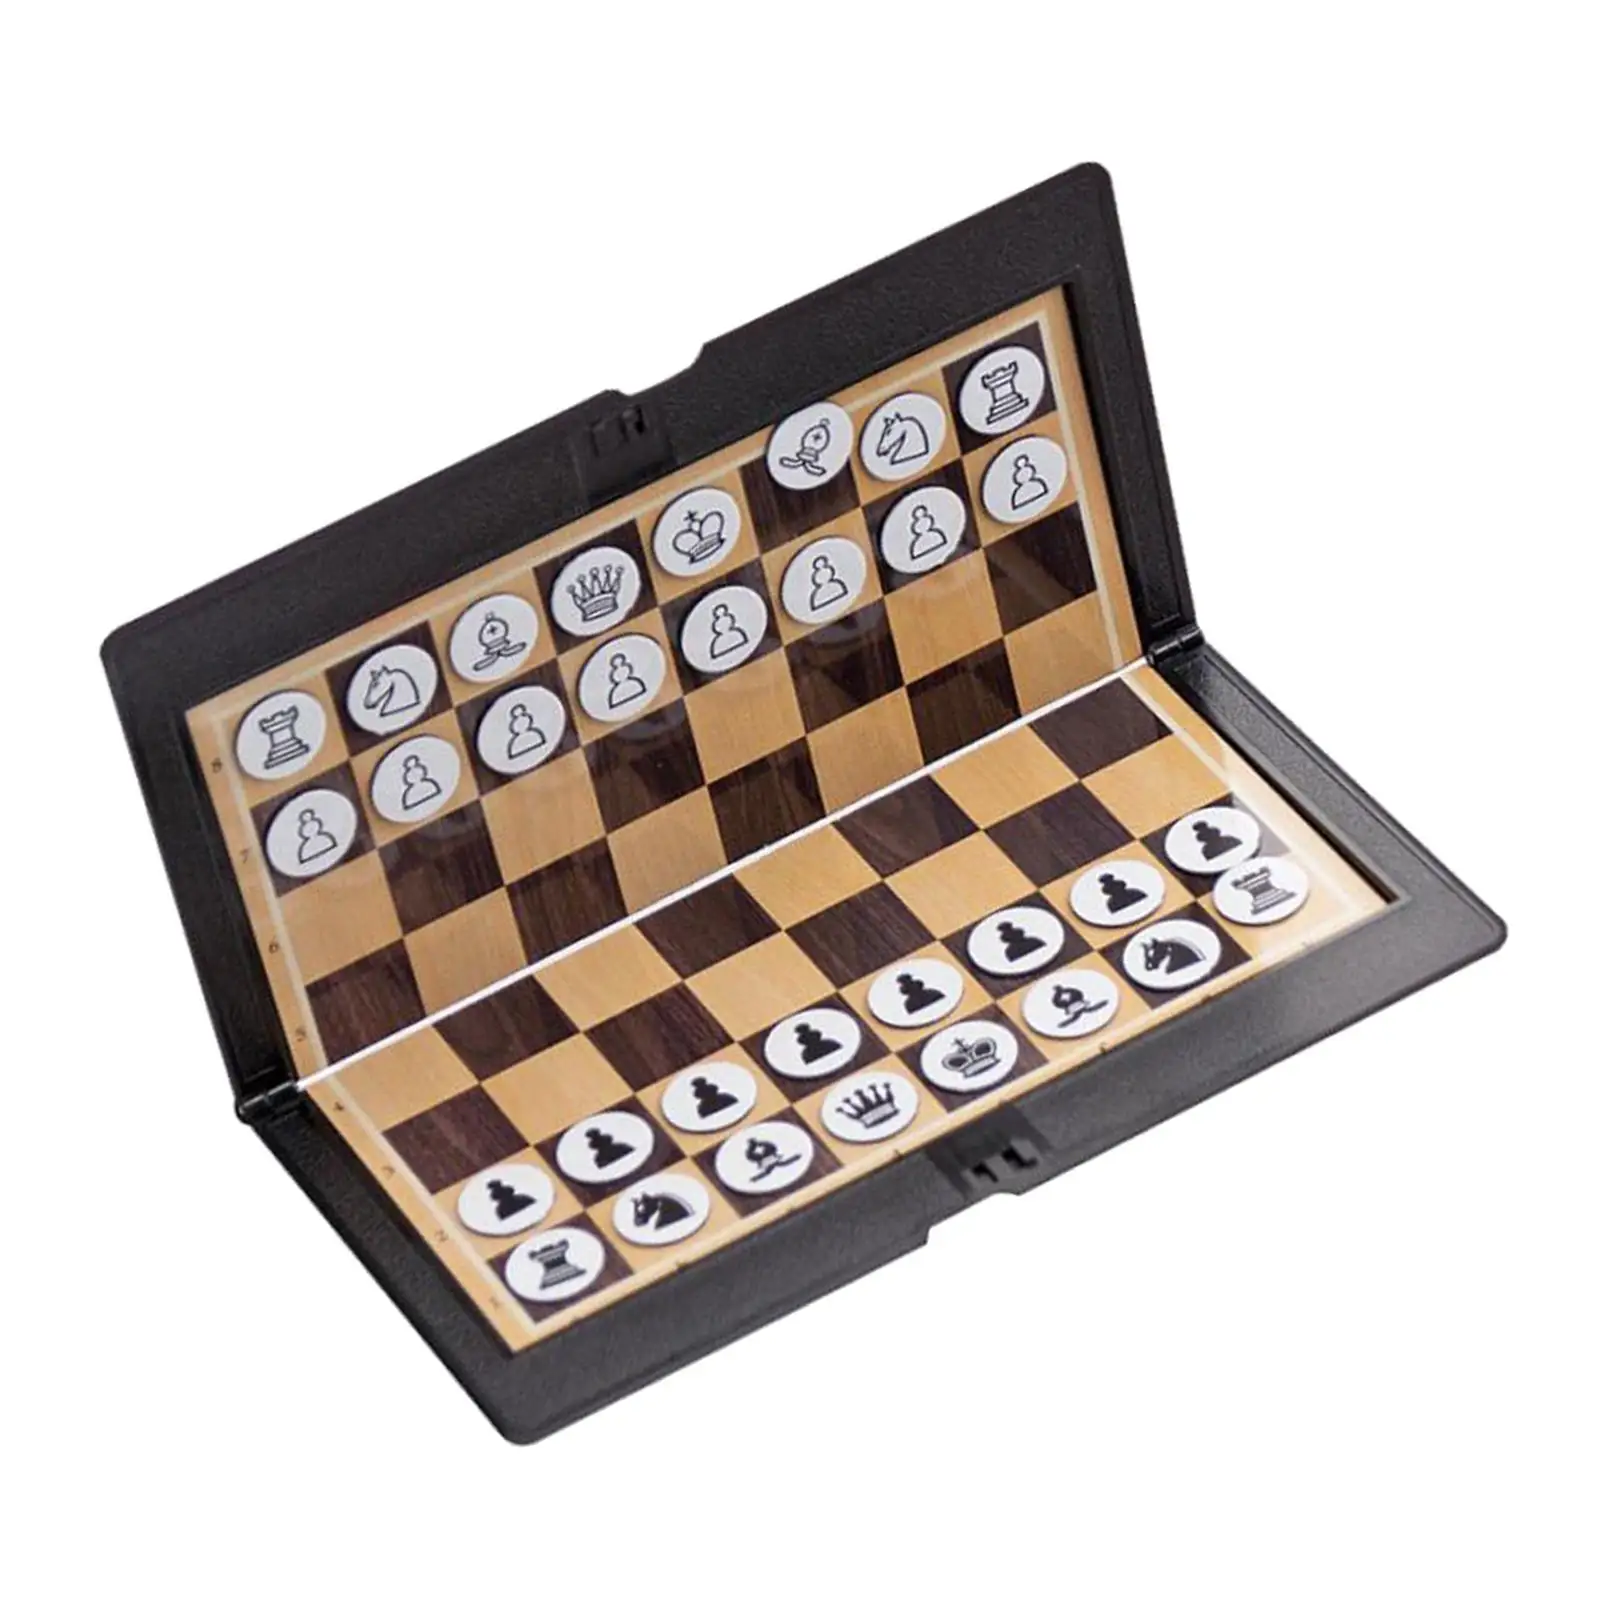 Foldable Chessboard Mini Size Chess Set Travel Portable Wallet Pocket Chess Board Game Family Game